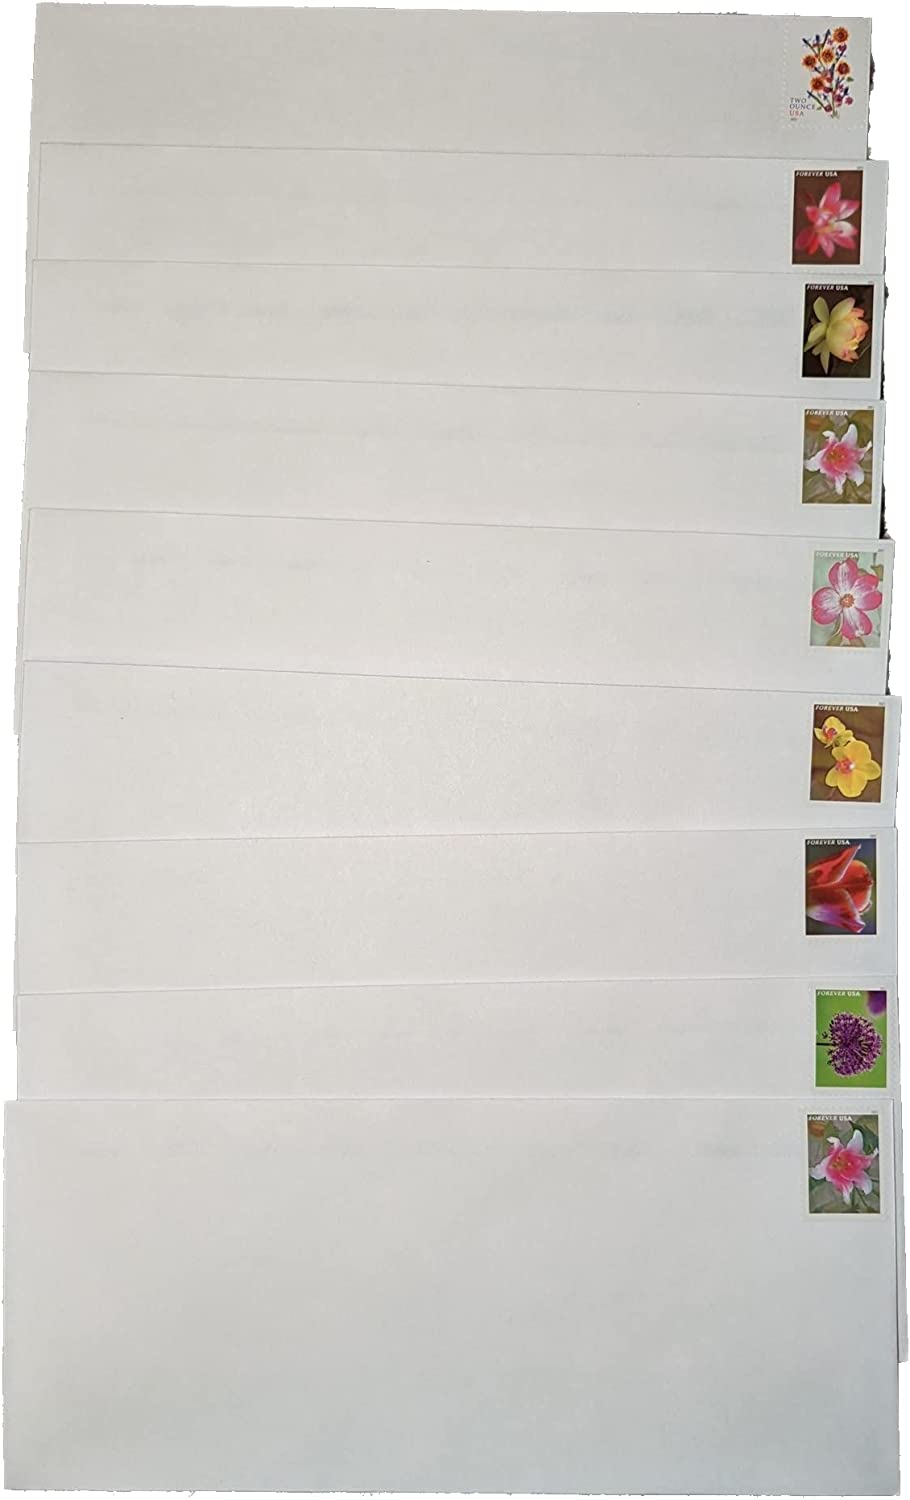 100 USPS Forever Postage Stamps, Roll of 100 Postage Stamps, Stamp Design  May Vary : : Office Products